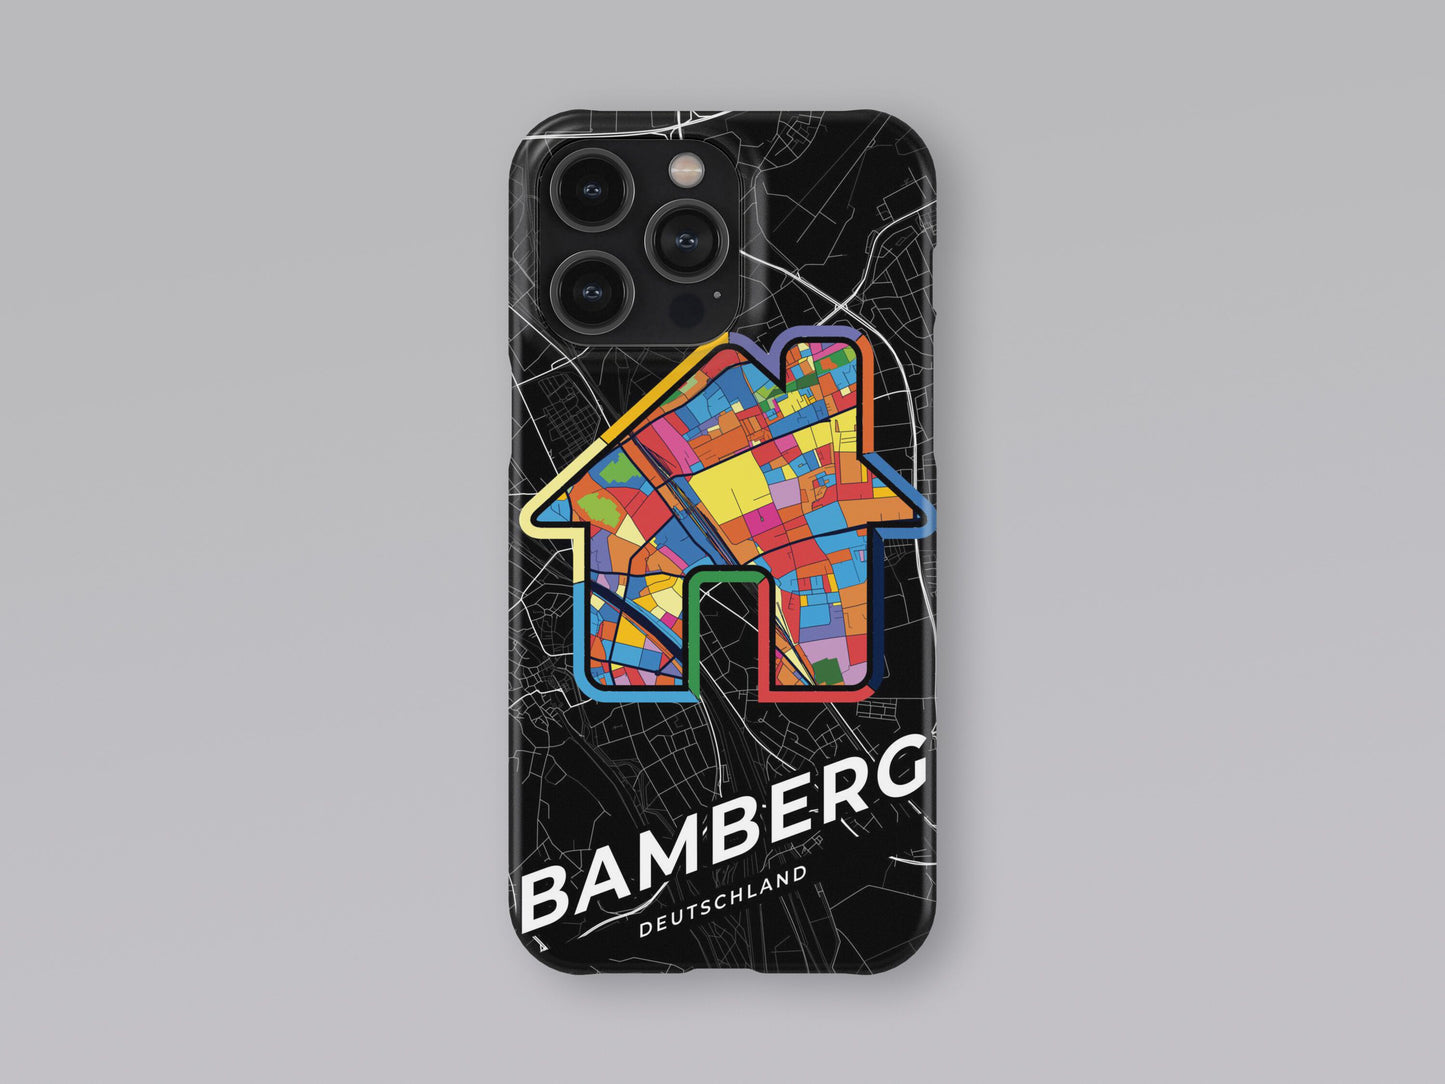 Bamberg Deutschland slim phone case with colorful icon. Birthday, wedding or housewarming gift. Couple match cases. 3